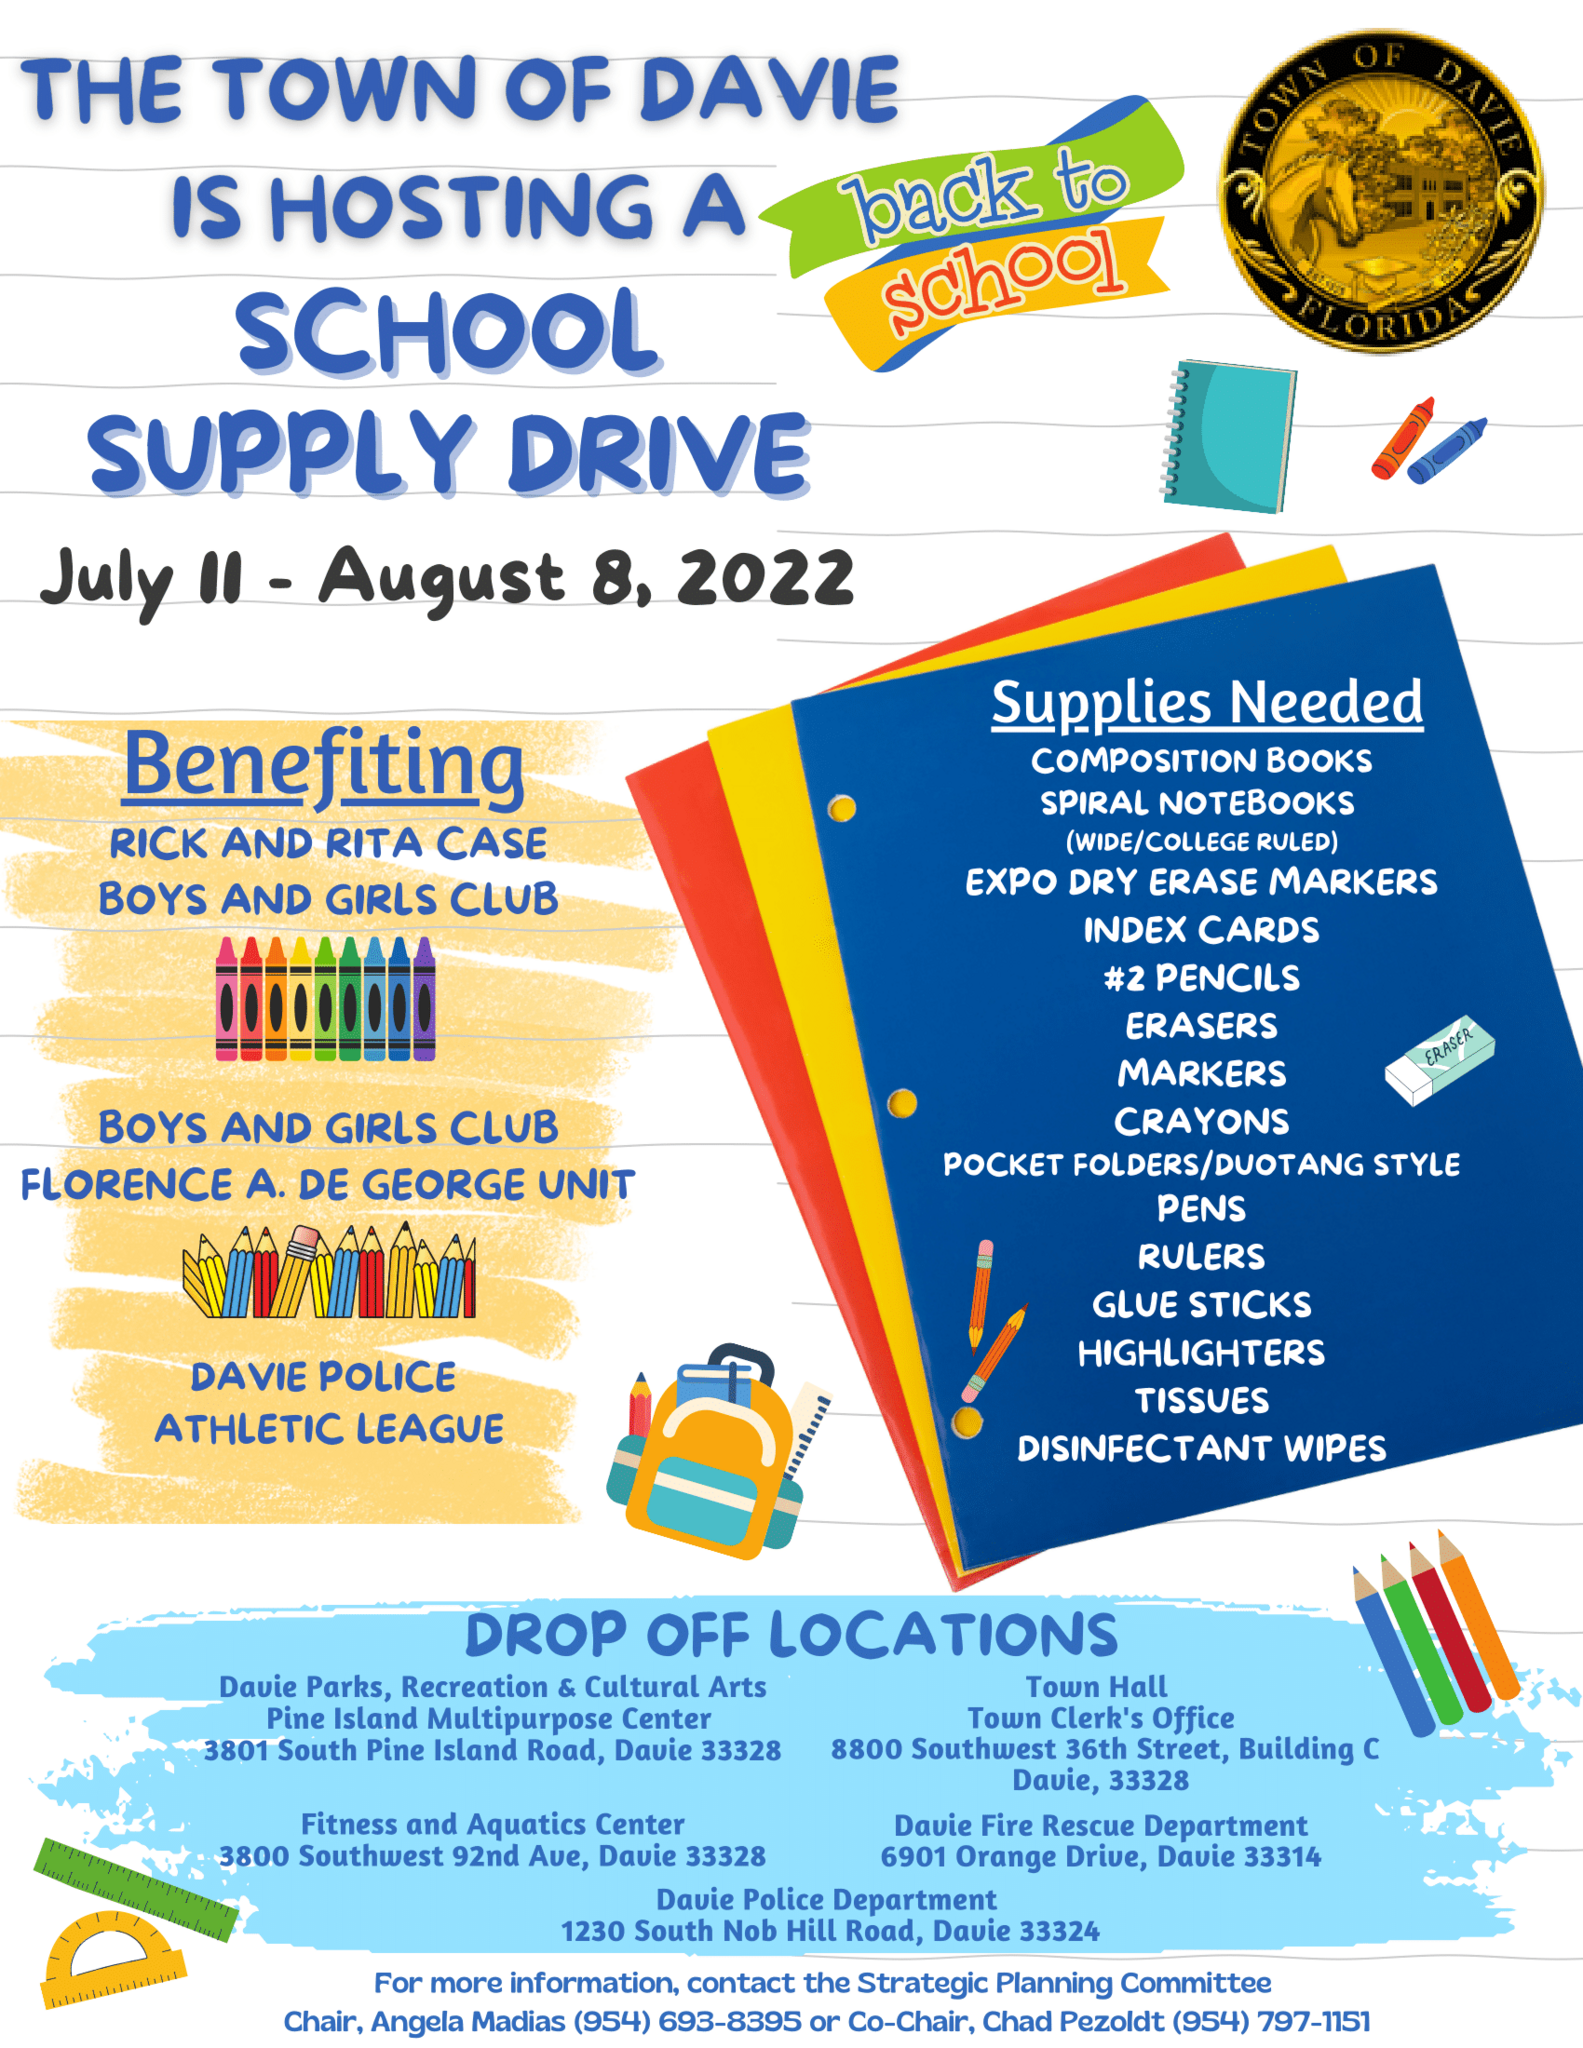 BacktoSchool Supply Donation Drive & Tax Free Holiday (Town of Davie